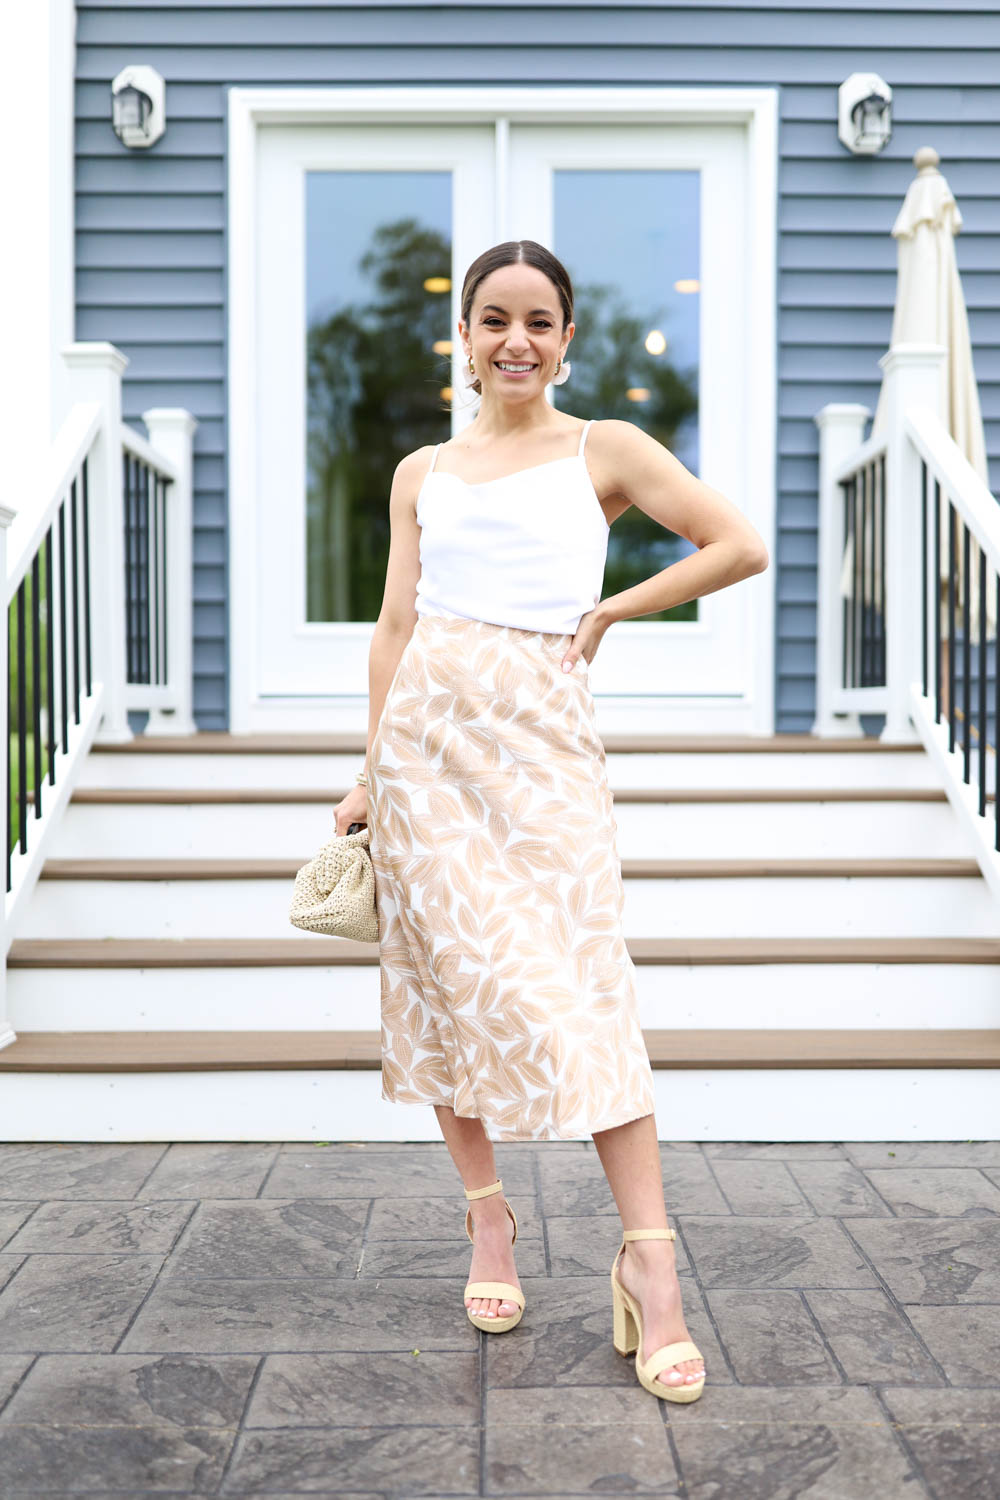 Five Simple Summer Outfits - Pumps & Push Ups